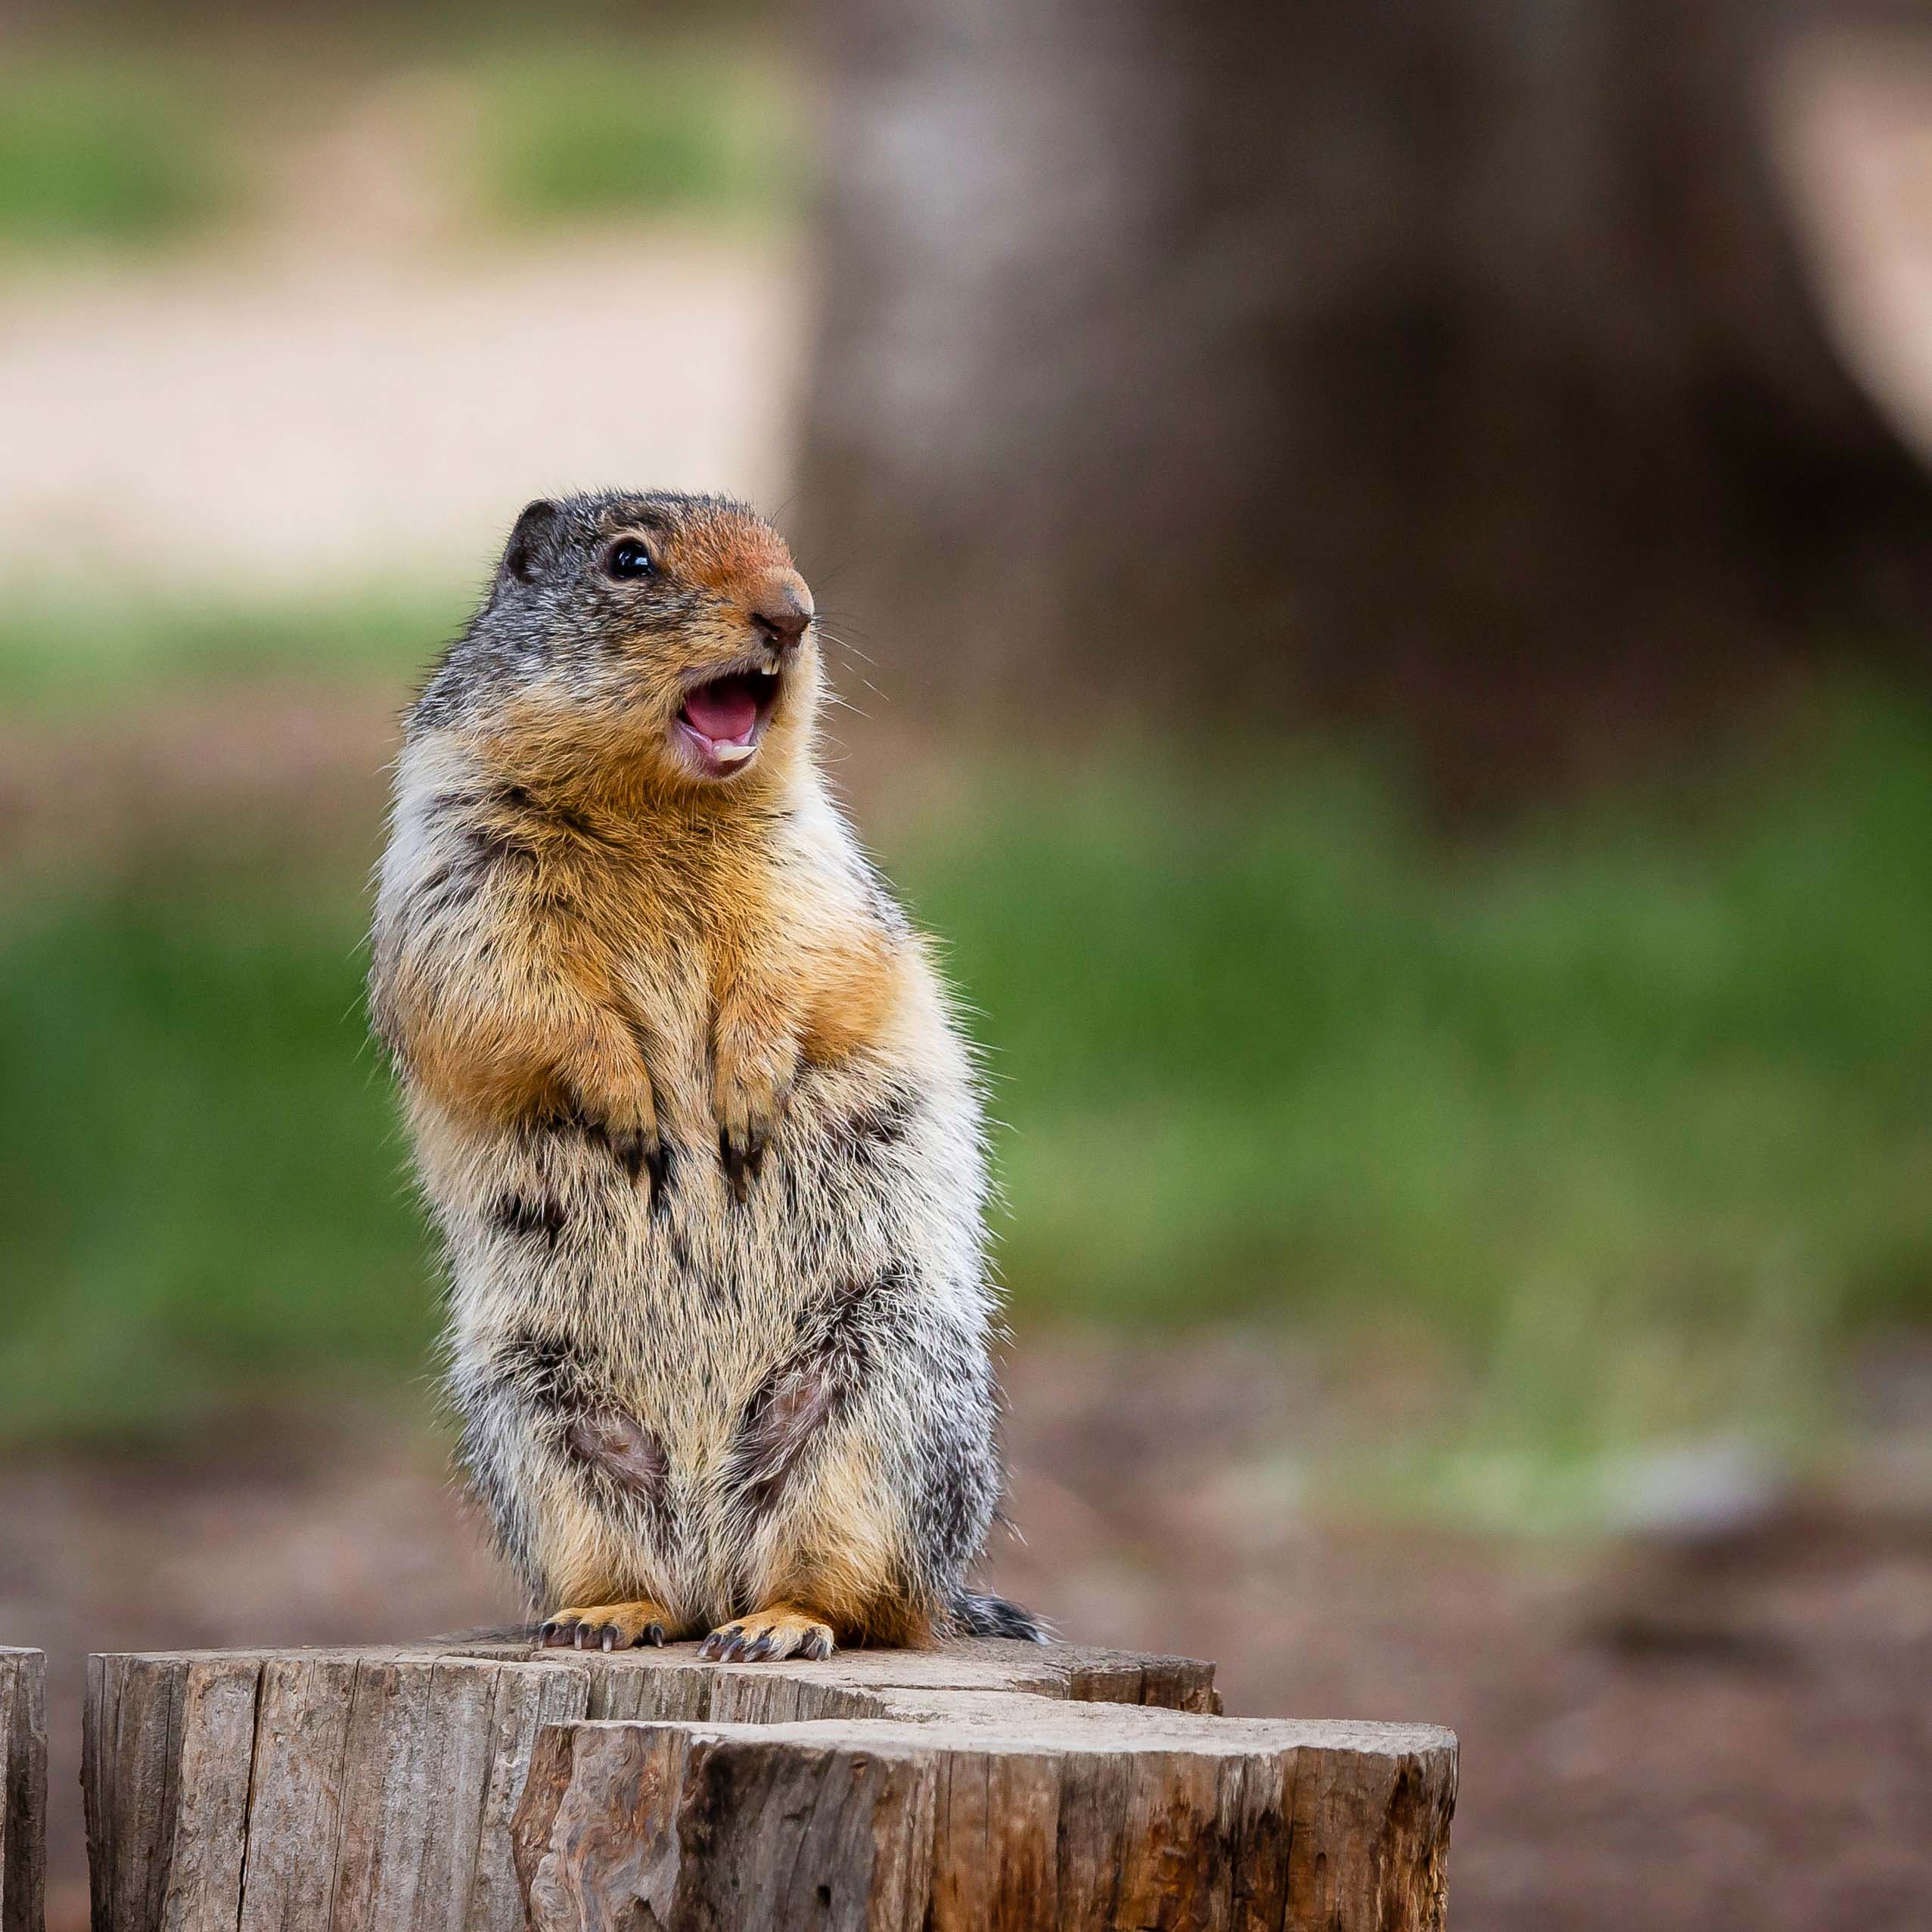 A ground squirrel standing up on a stump with its mouth open, likely making a cute warning sound